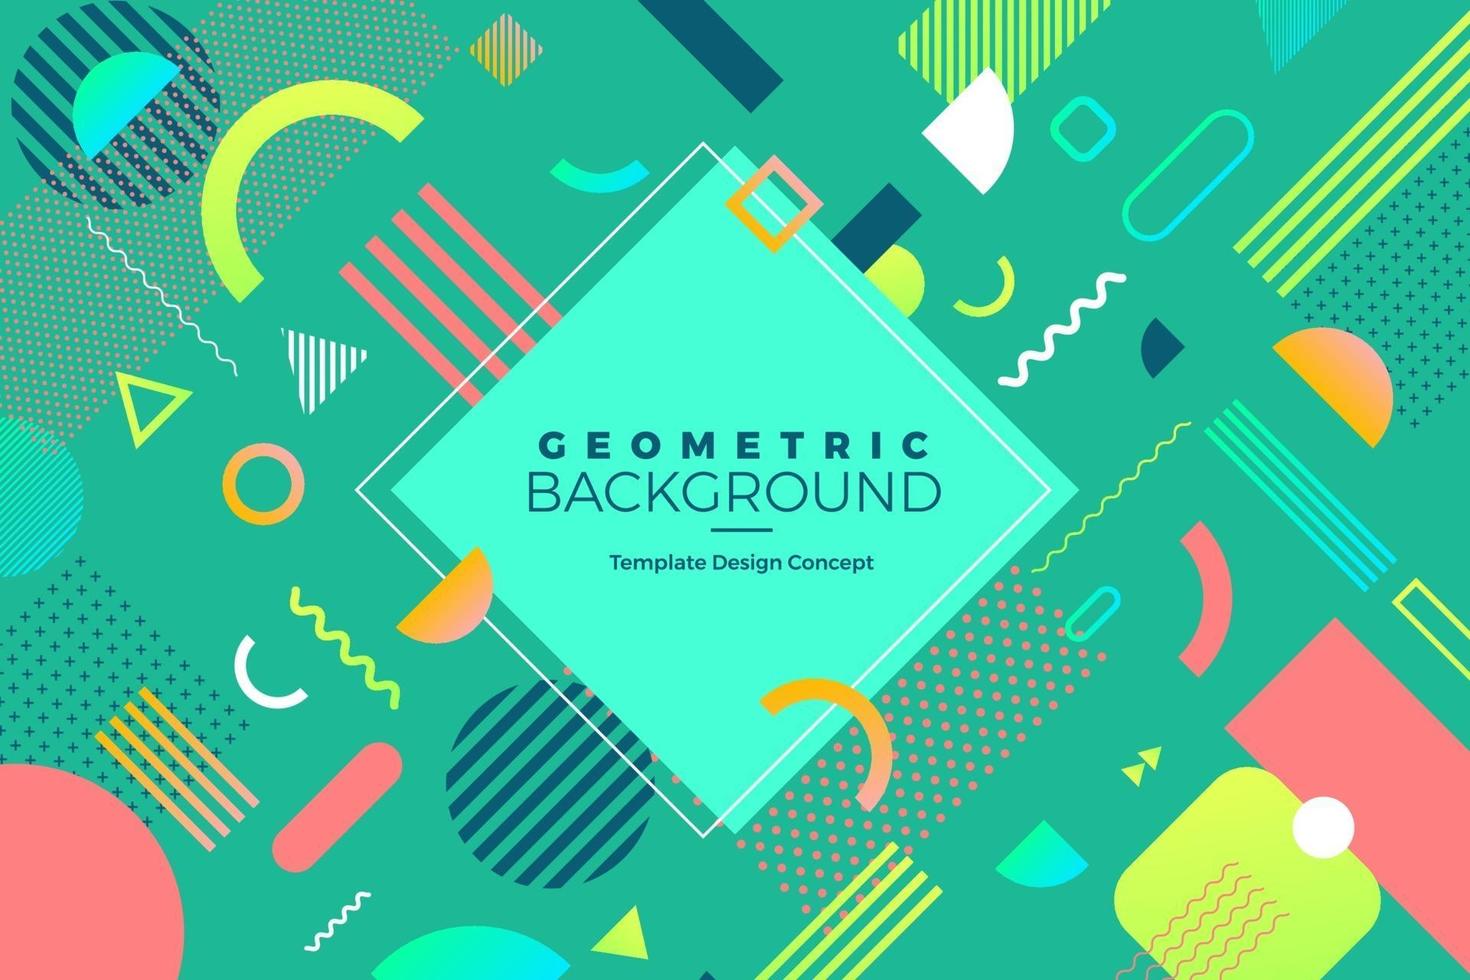 Geometric background with bright colors and dynamic shape compositions vector